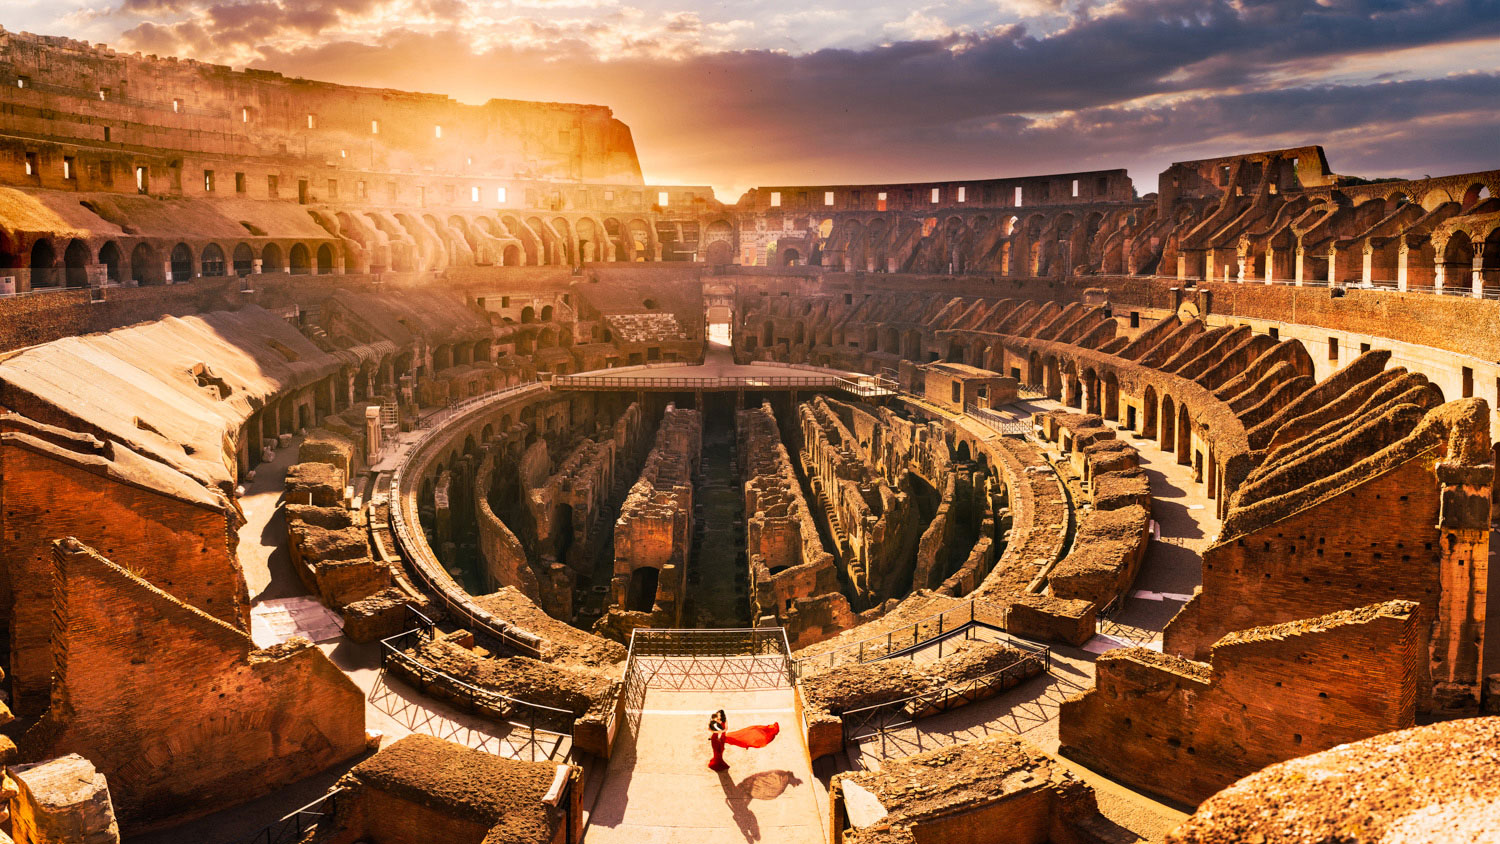 Our best photo of the Roman Colosseum